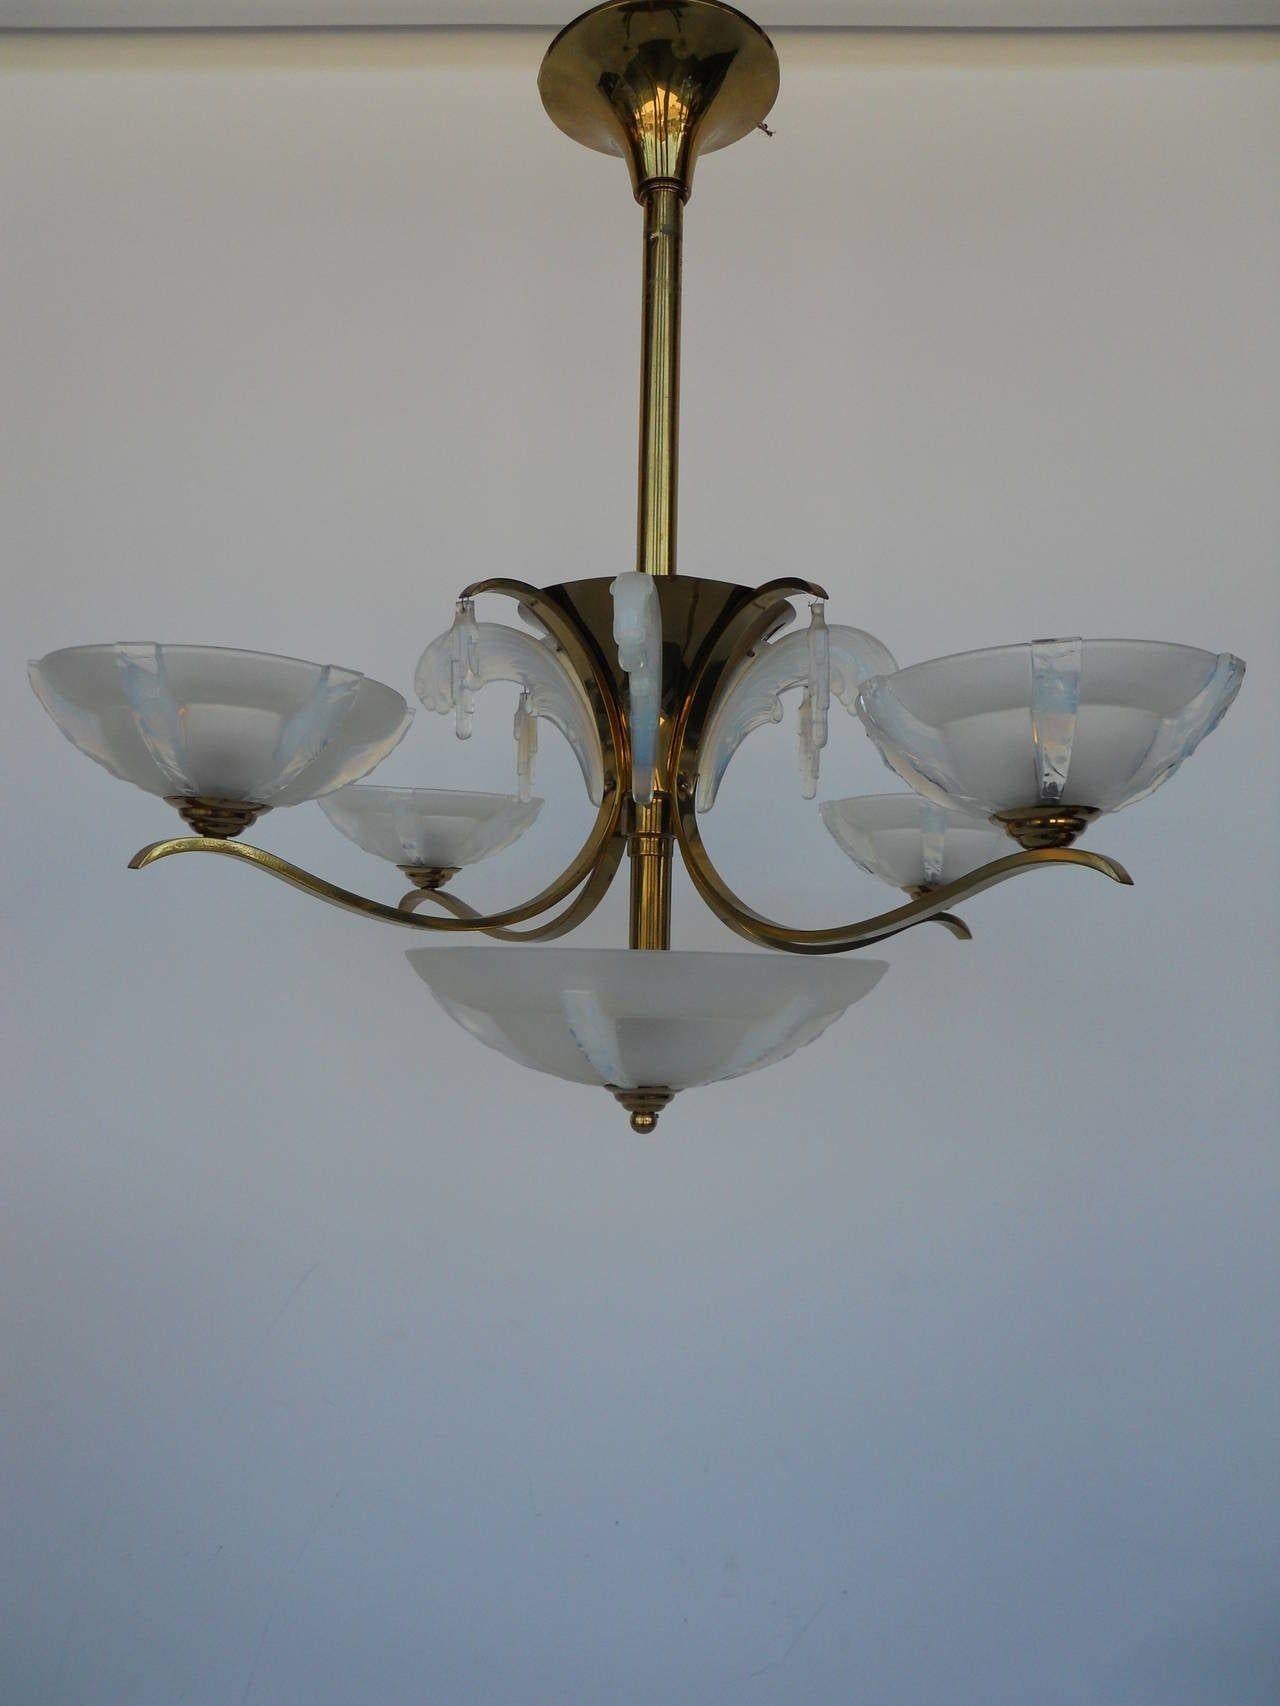 Italian opalescent glass chandelier after Sabino.
Four arms.
Eight lights total, lights also located inside the bottom plafonia and inside the upper brass cup.